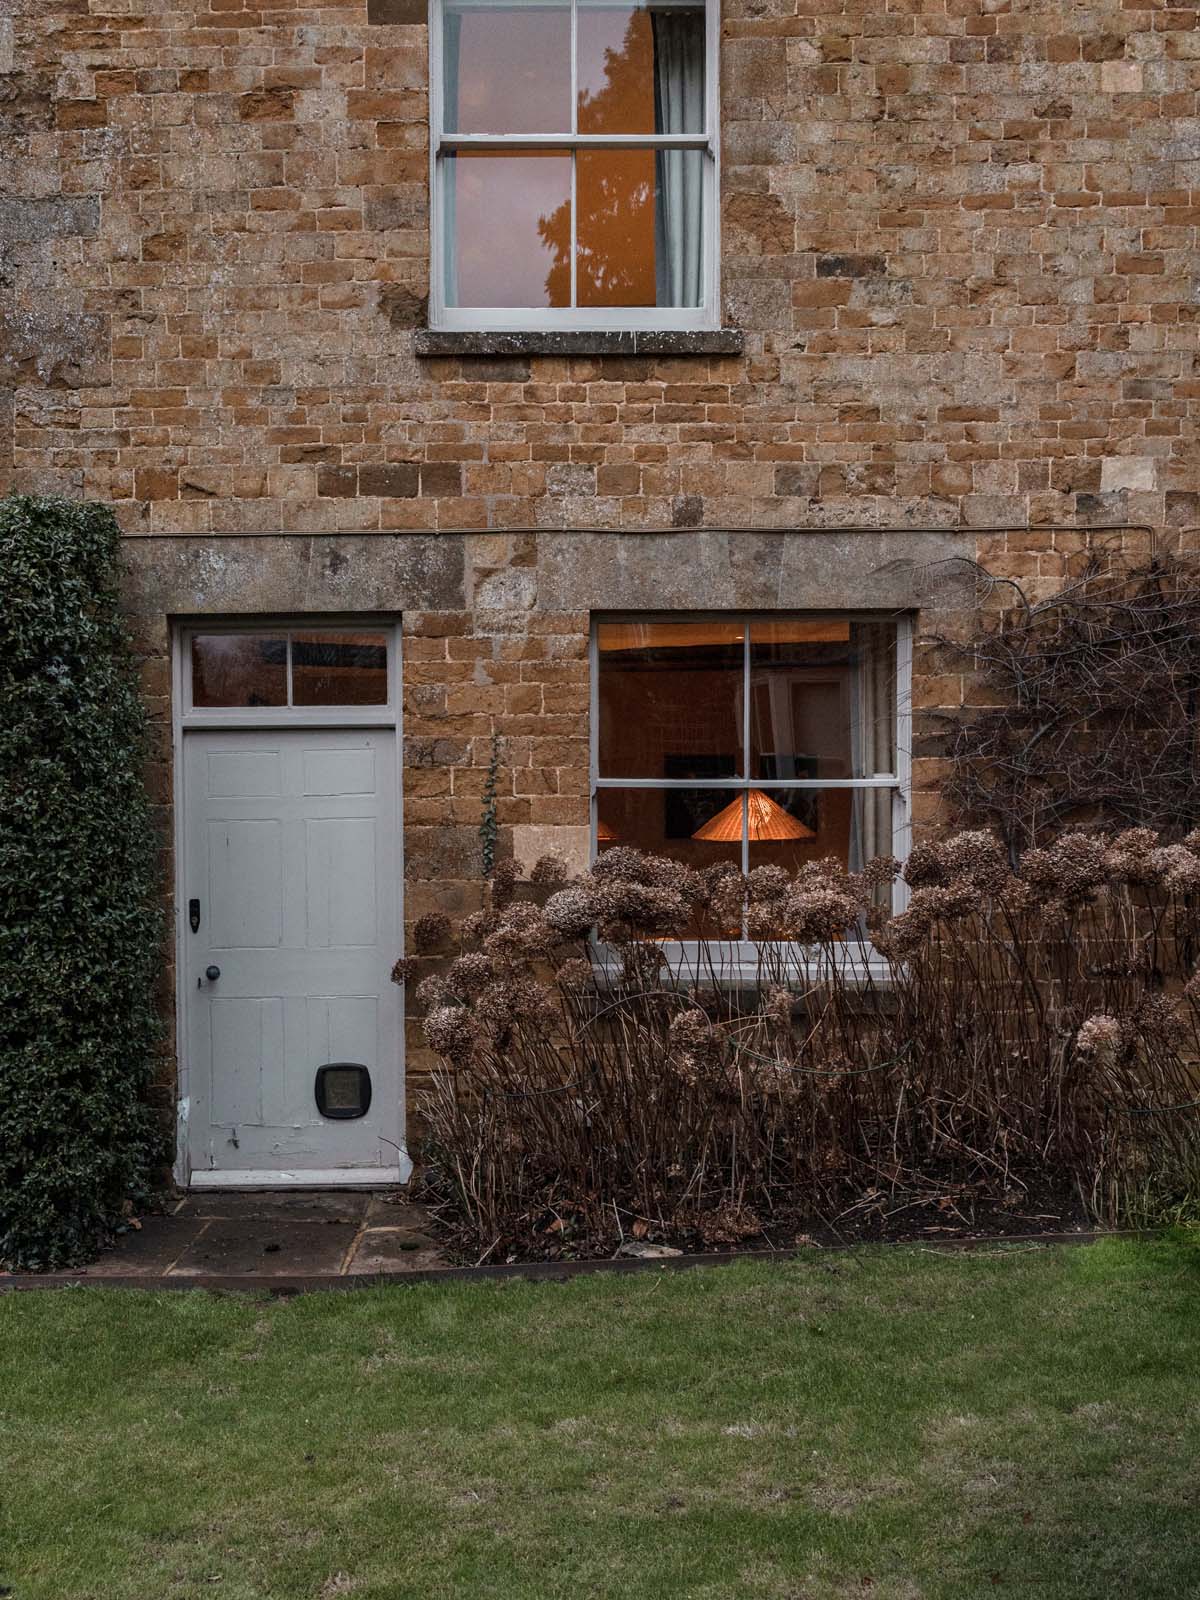 Country house autumnal exterior with warm lights on inside